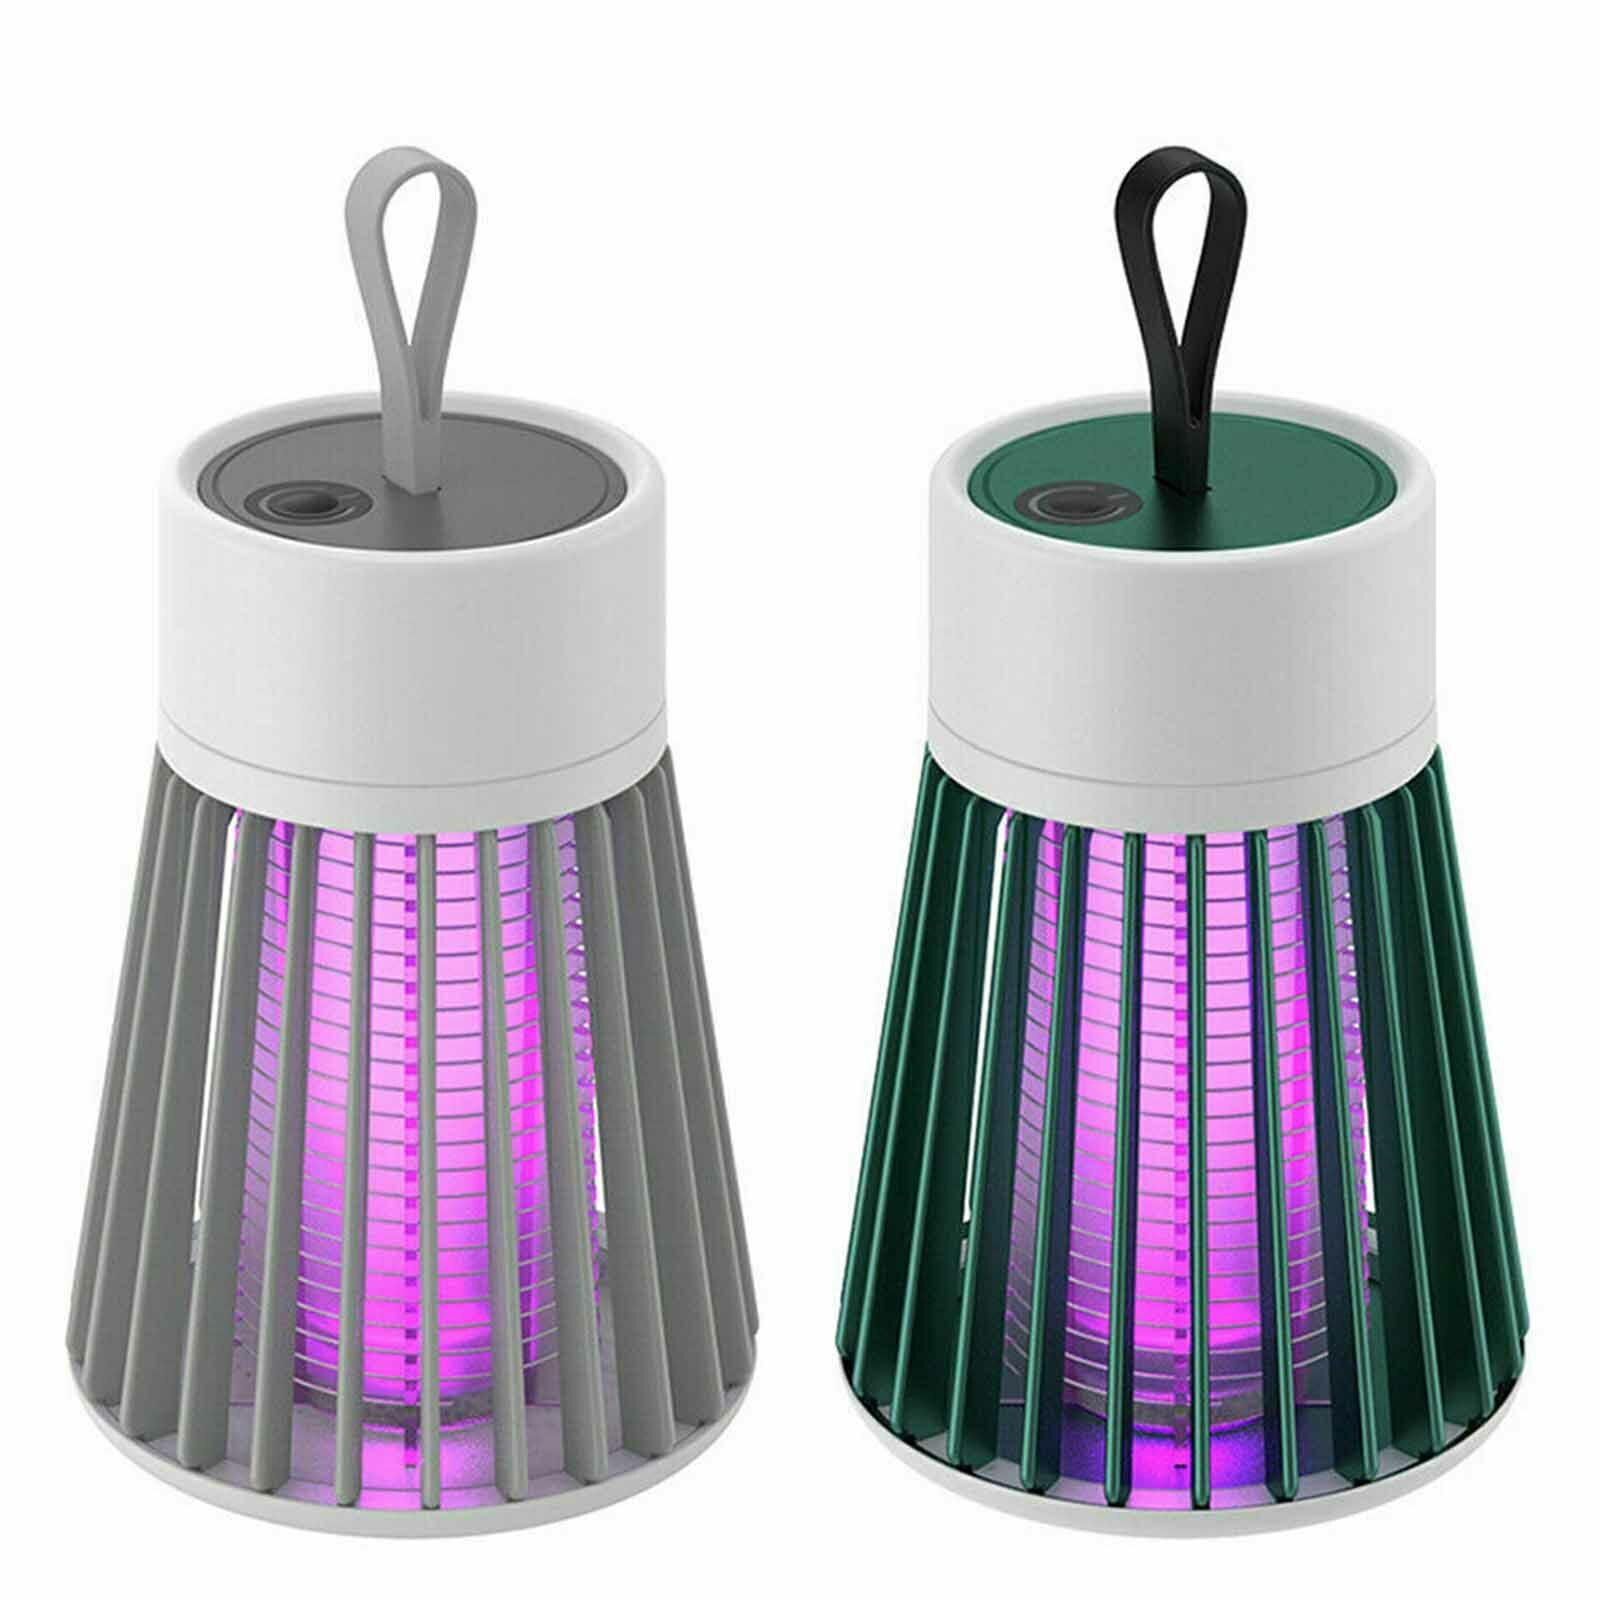 USB Electric UV LED Light Mosquito Killer Insect Fly-Bug Trap Catcher T7R9 